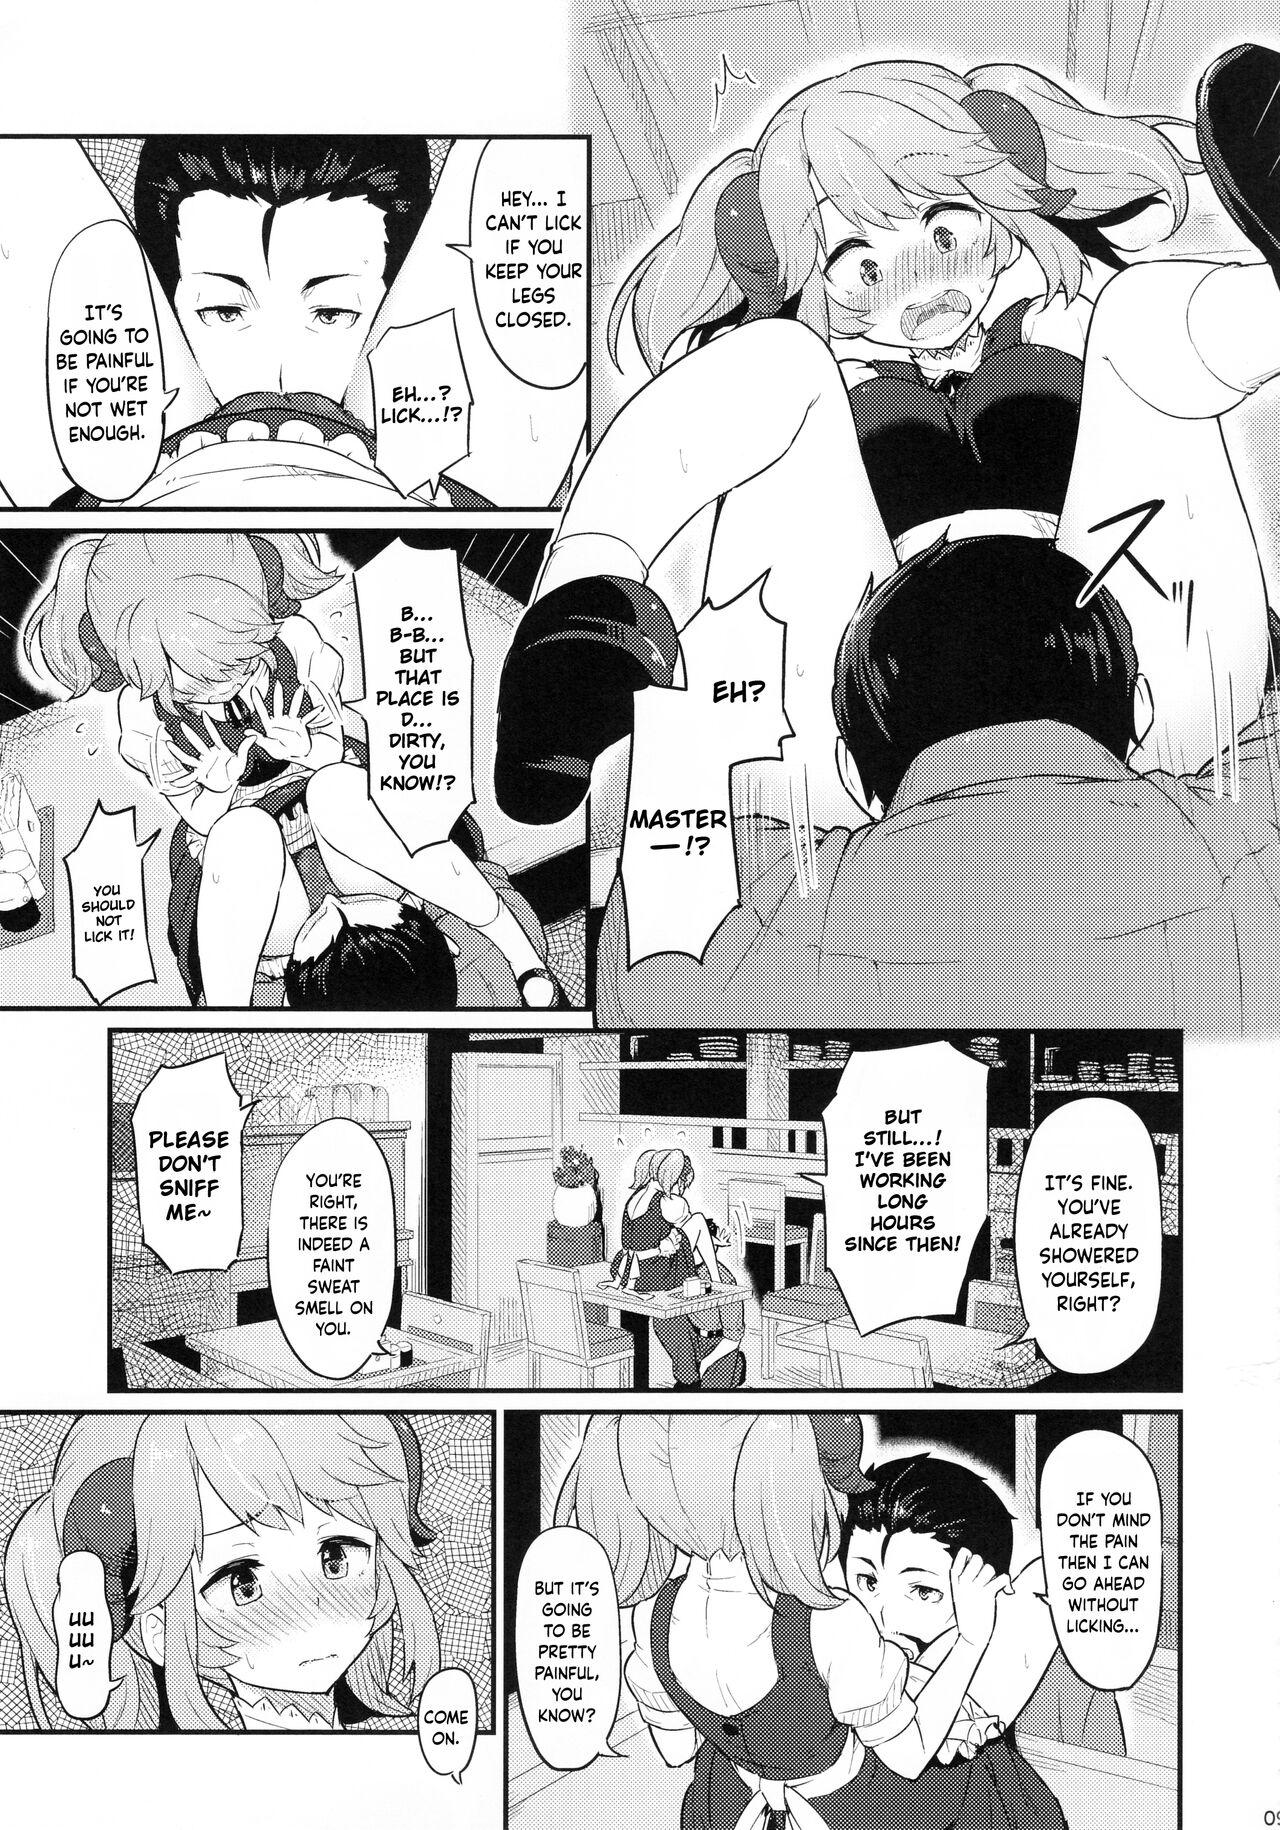 Pija Toaru Doyou no Hi | On a Certain Day of Satur - Isekai shokudou | restaurant to another world Oral - Page 10